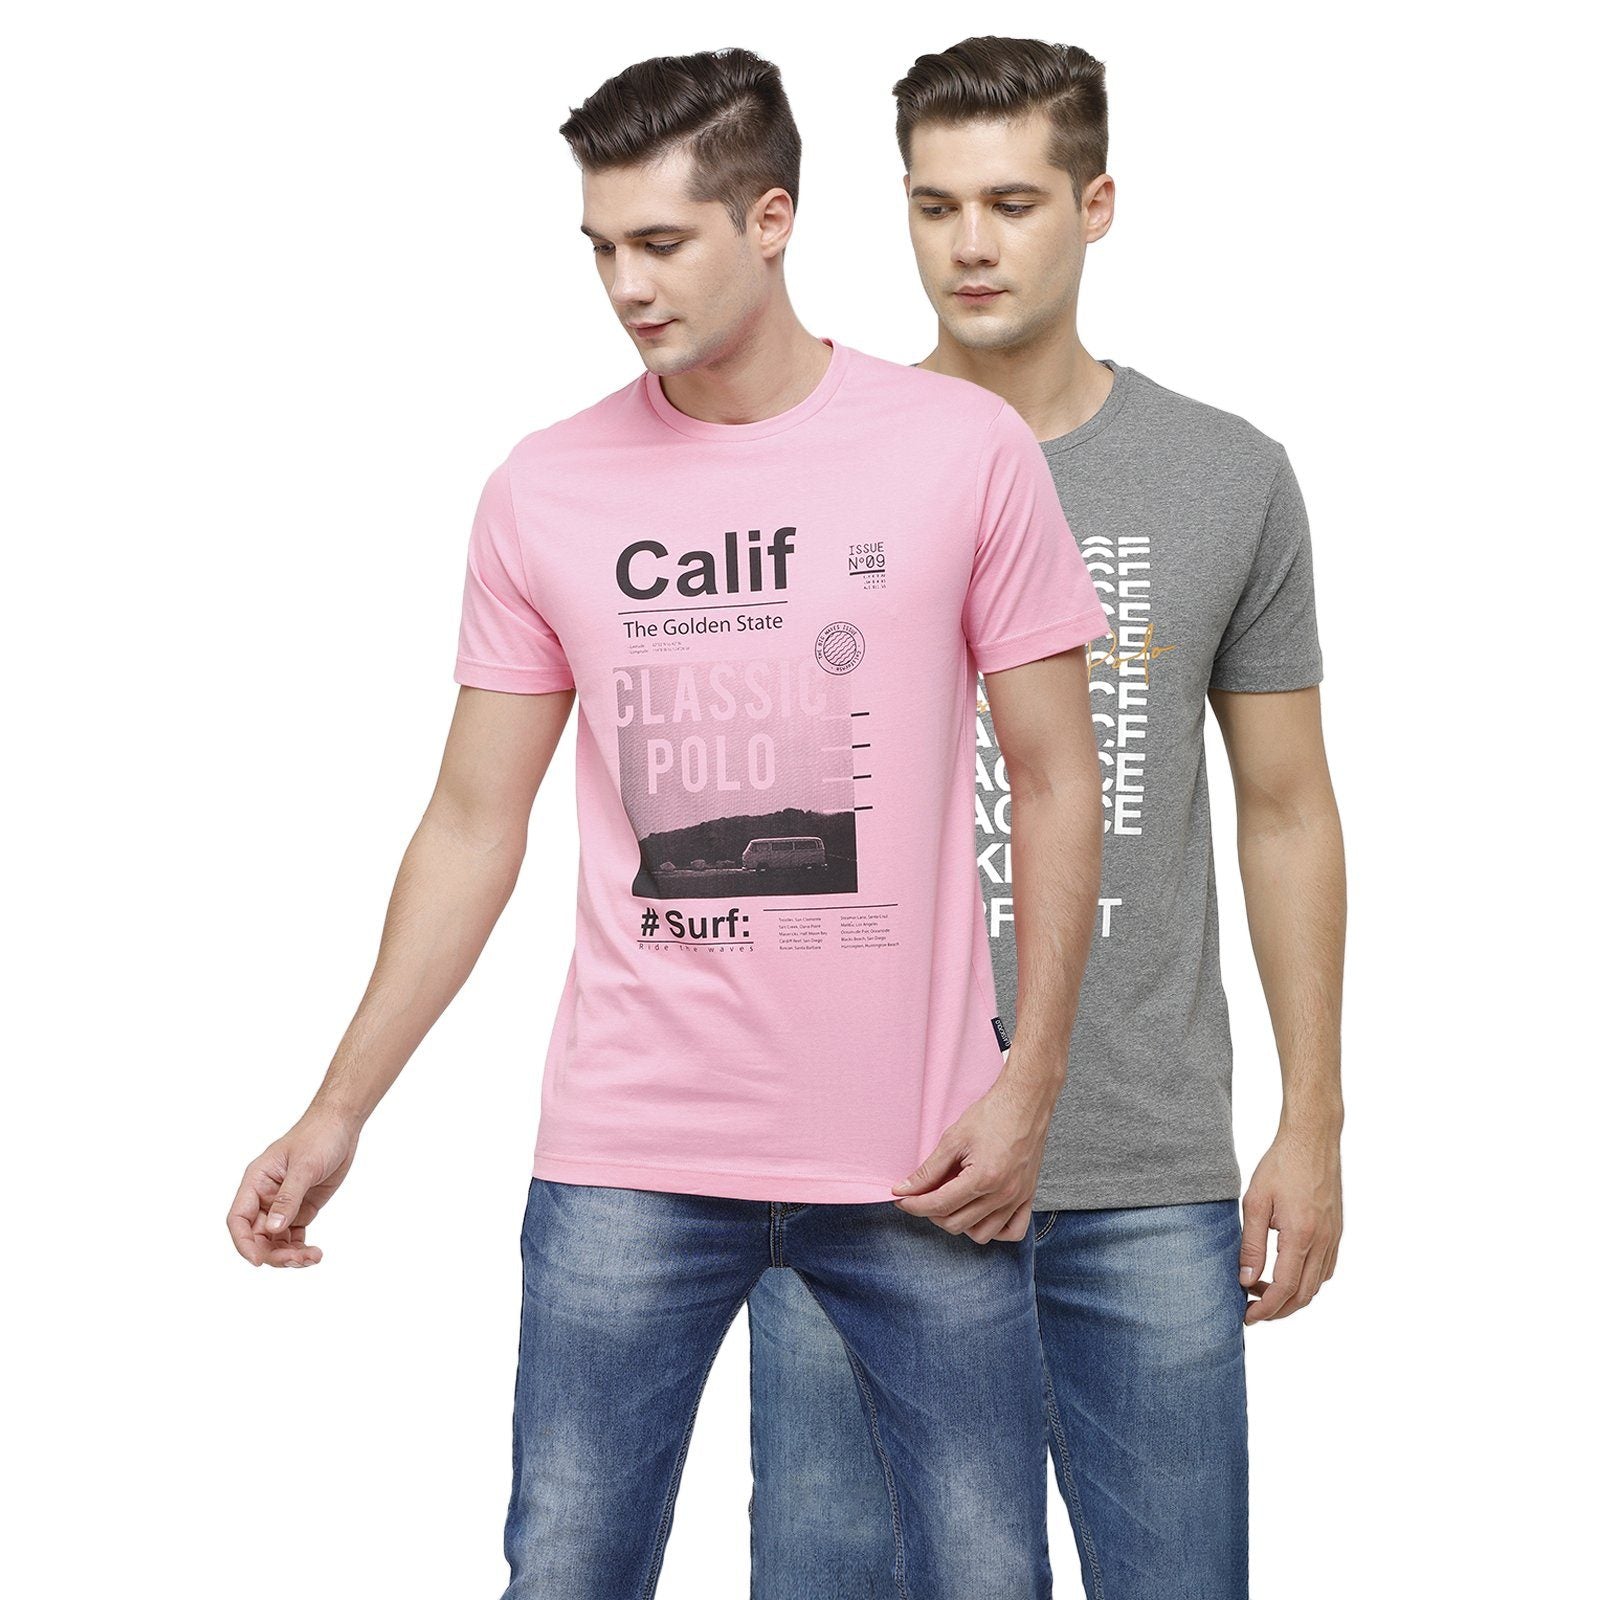 Classic Polo Men's Half Sleeve Crew Neck Grey & Pink Slim Fit Single Jersey Pack Of 2 T-shirt Iris - 05 T-shirt Classic Polo 